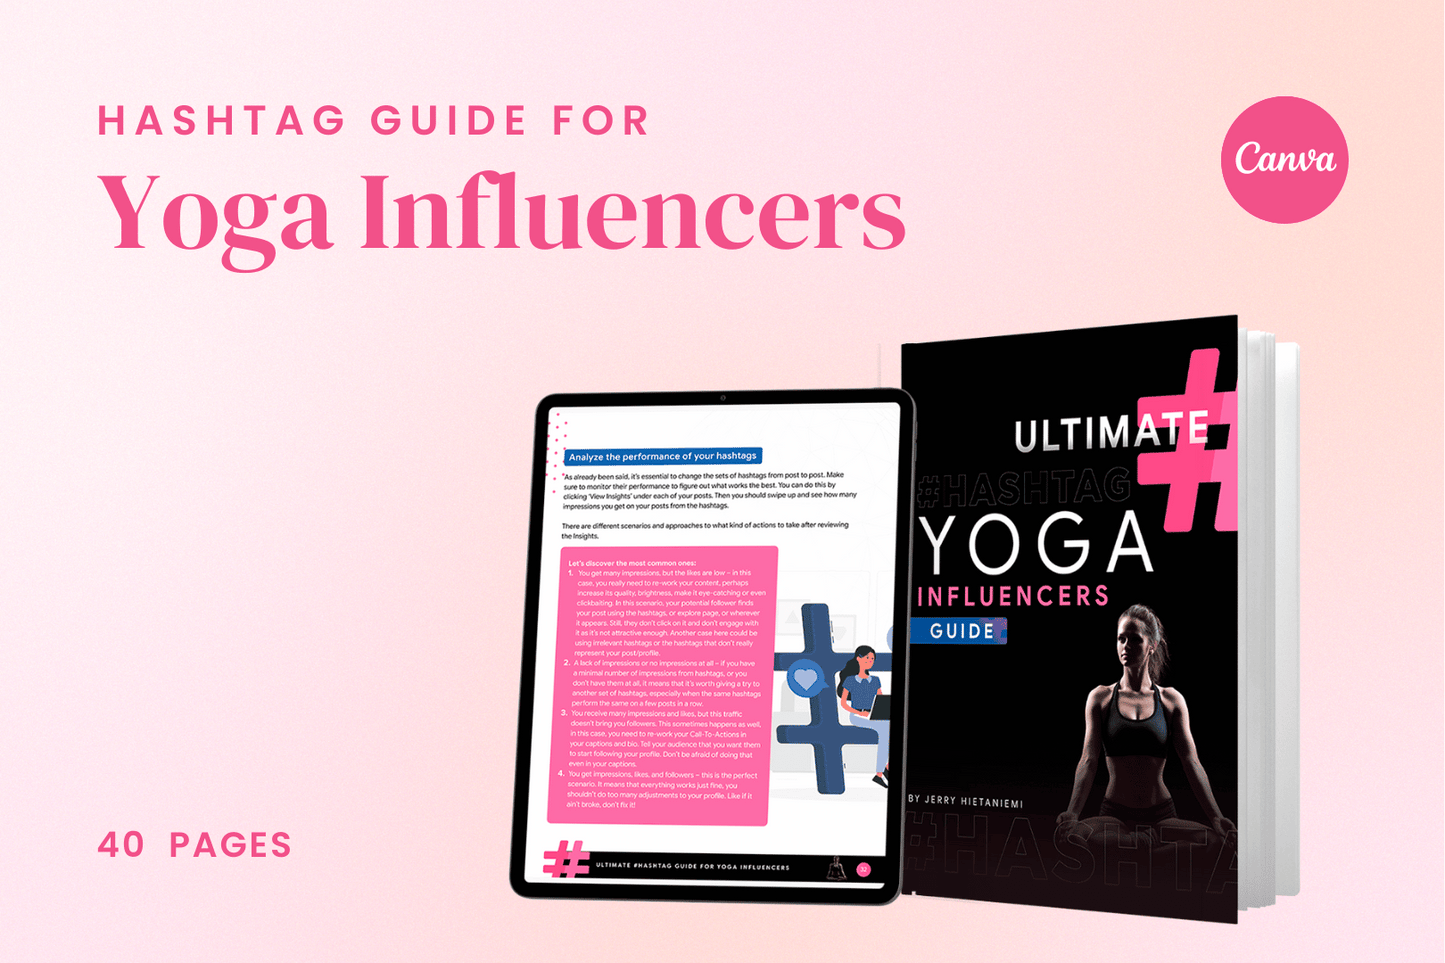 Hashtag Guide For Yoga Influencers